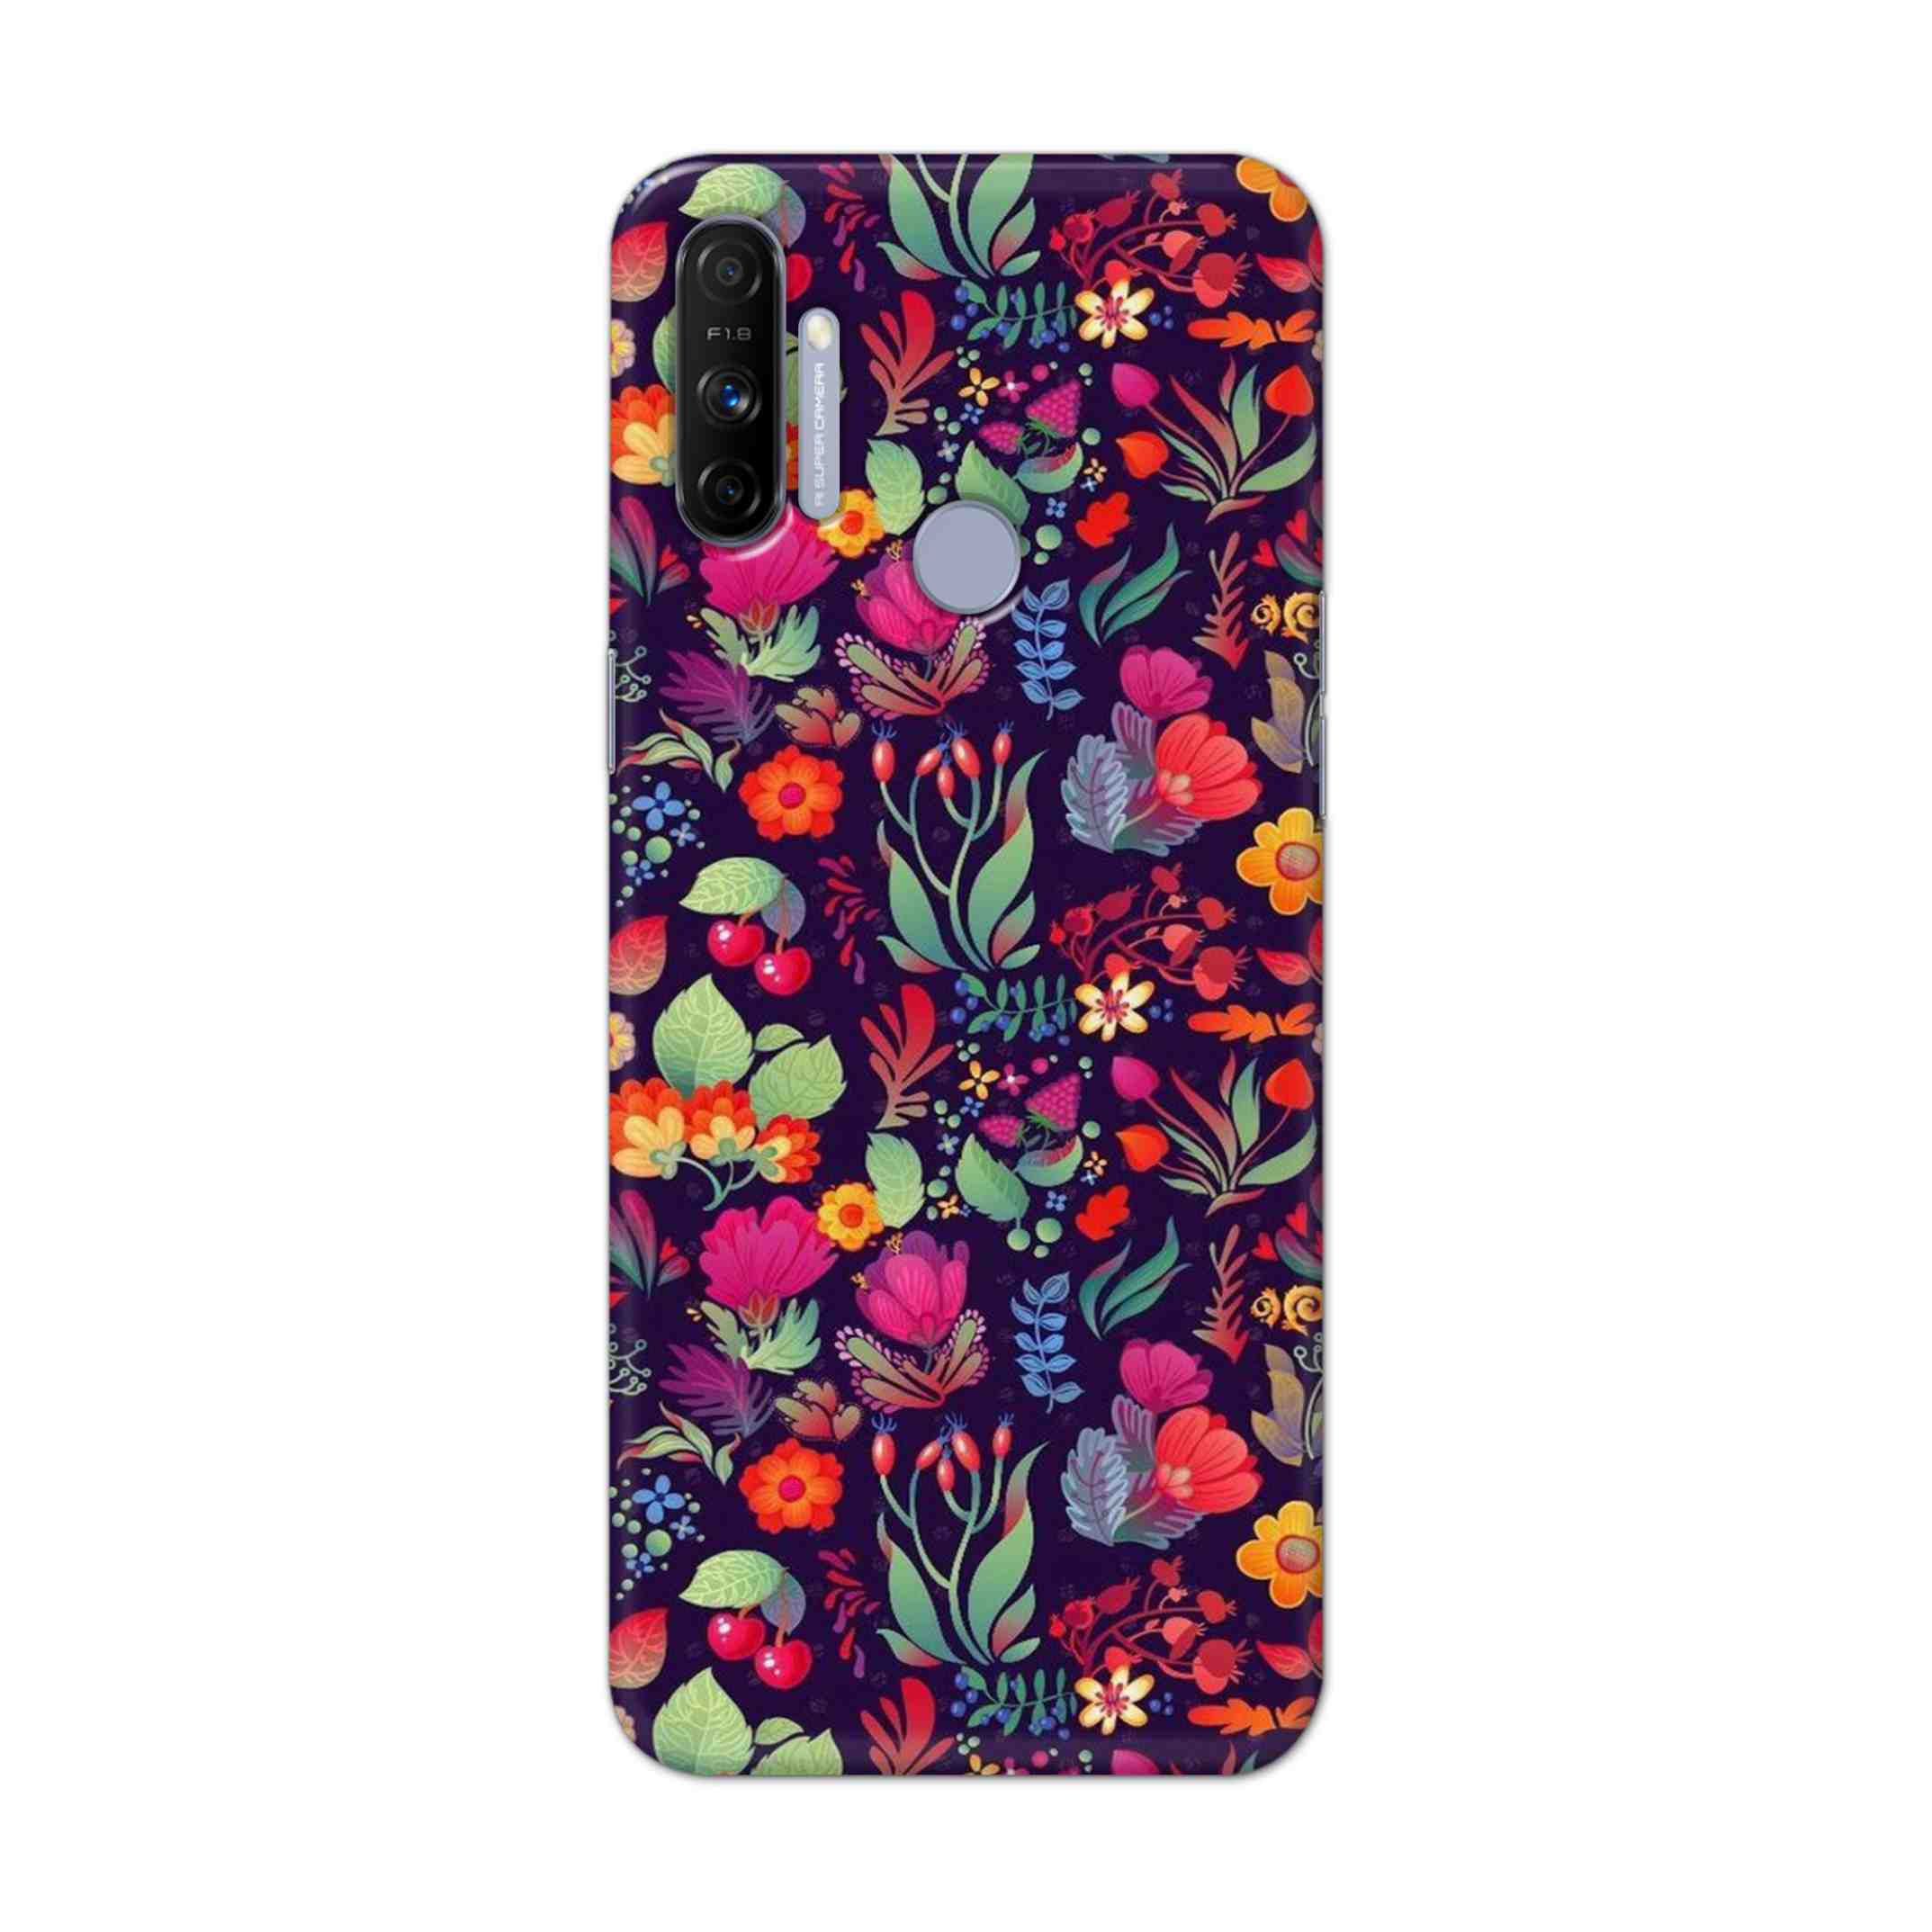 Buy Fruits Flower Hard Back Mobile Phone Case Cover For Realme Narzo 20A Online